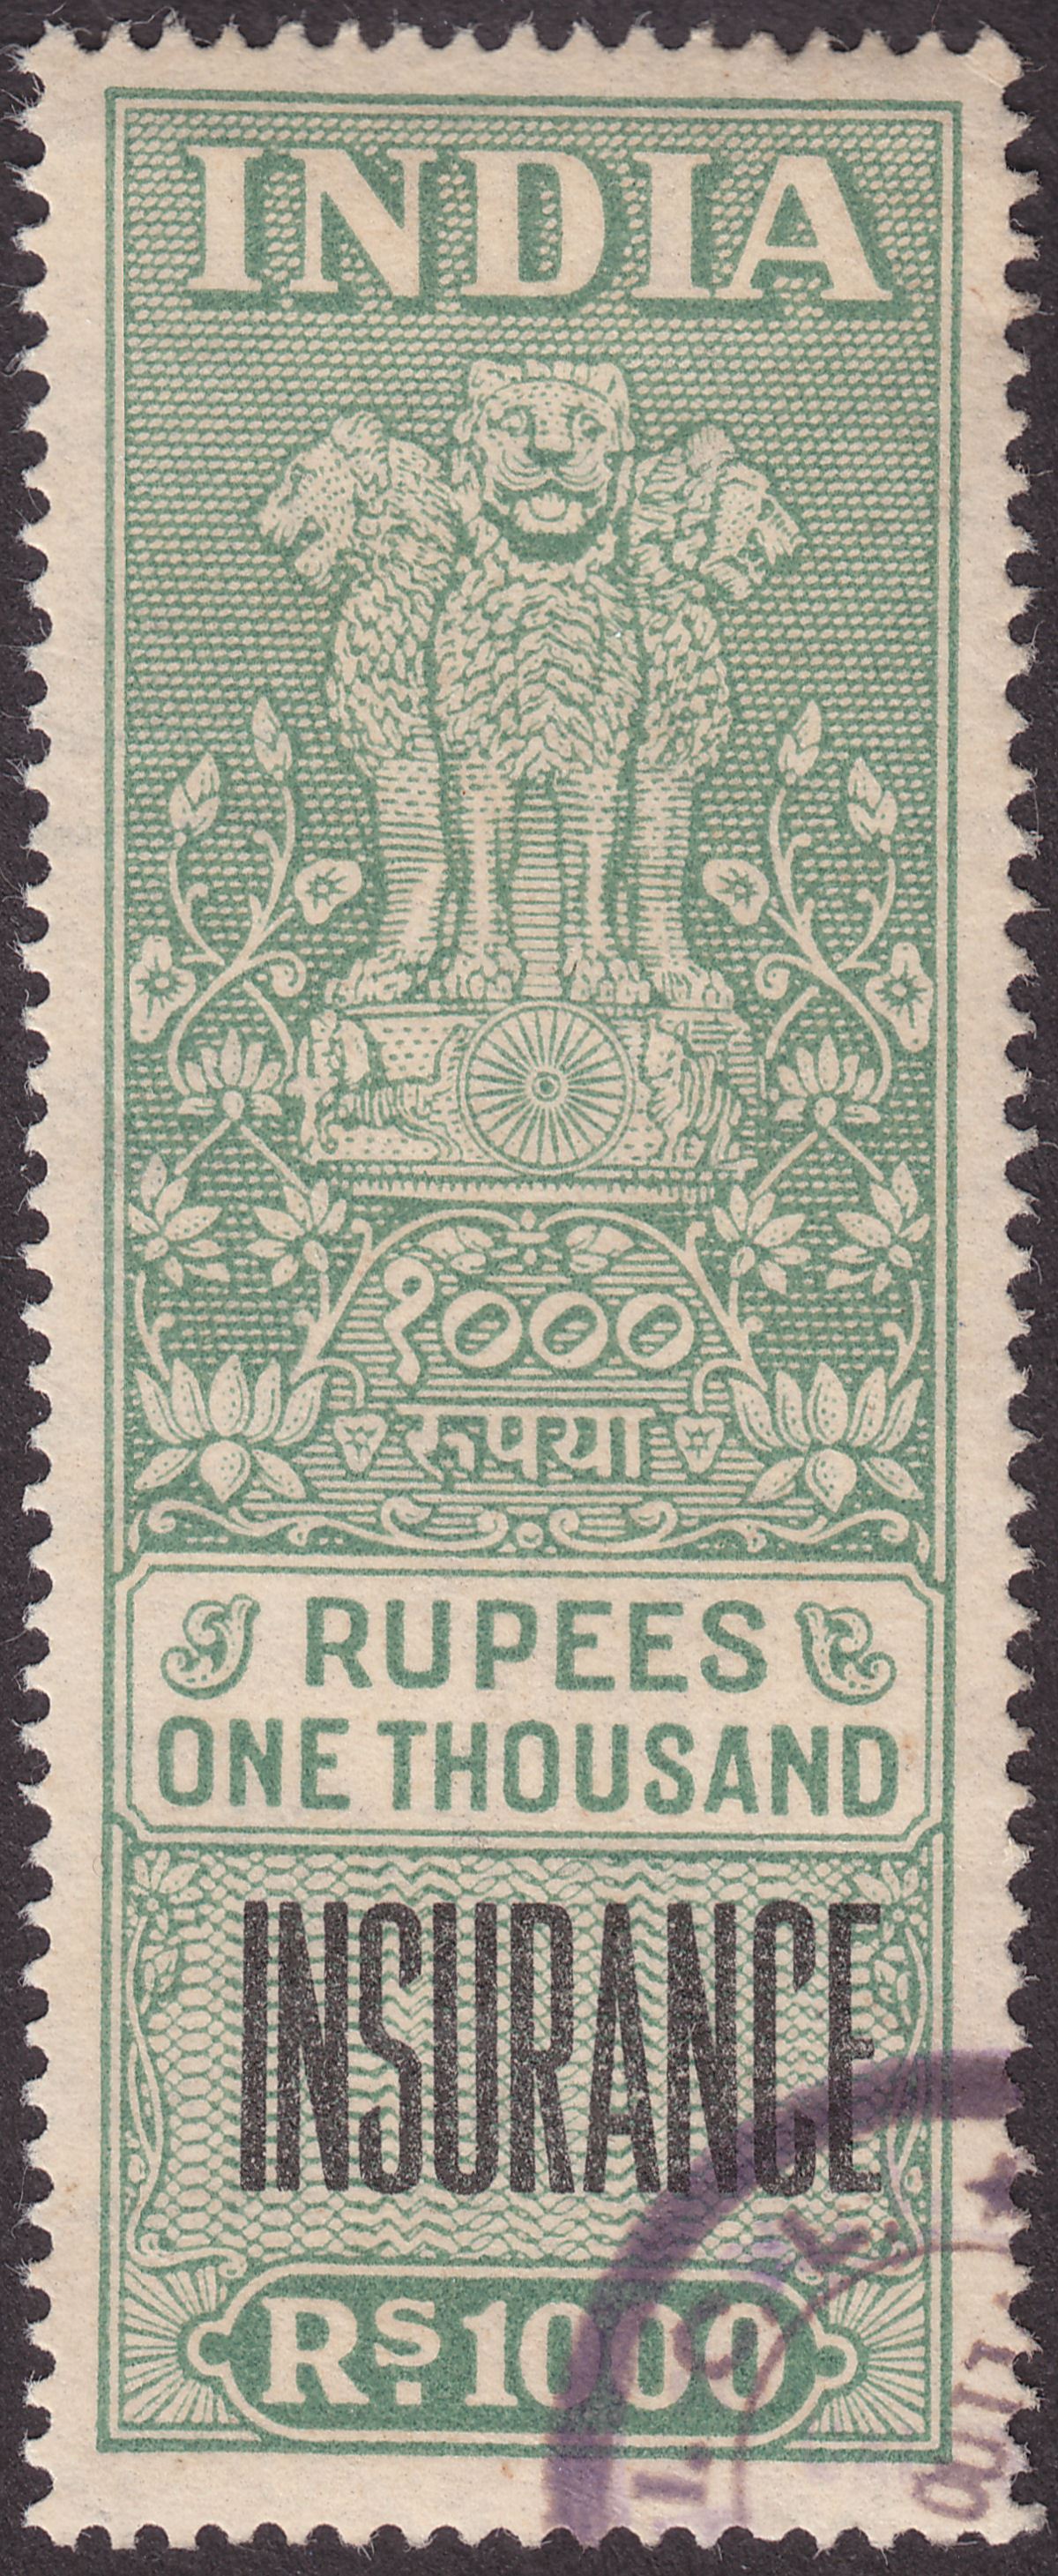 India 1958 Revenue Insurance 1000r Green and Black Used BF100